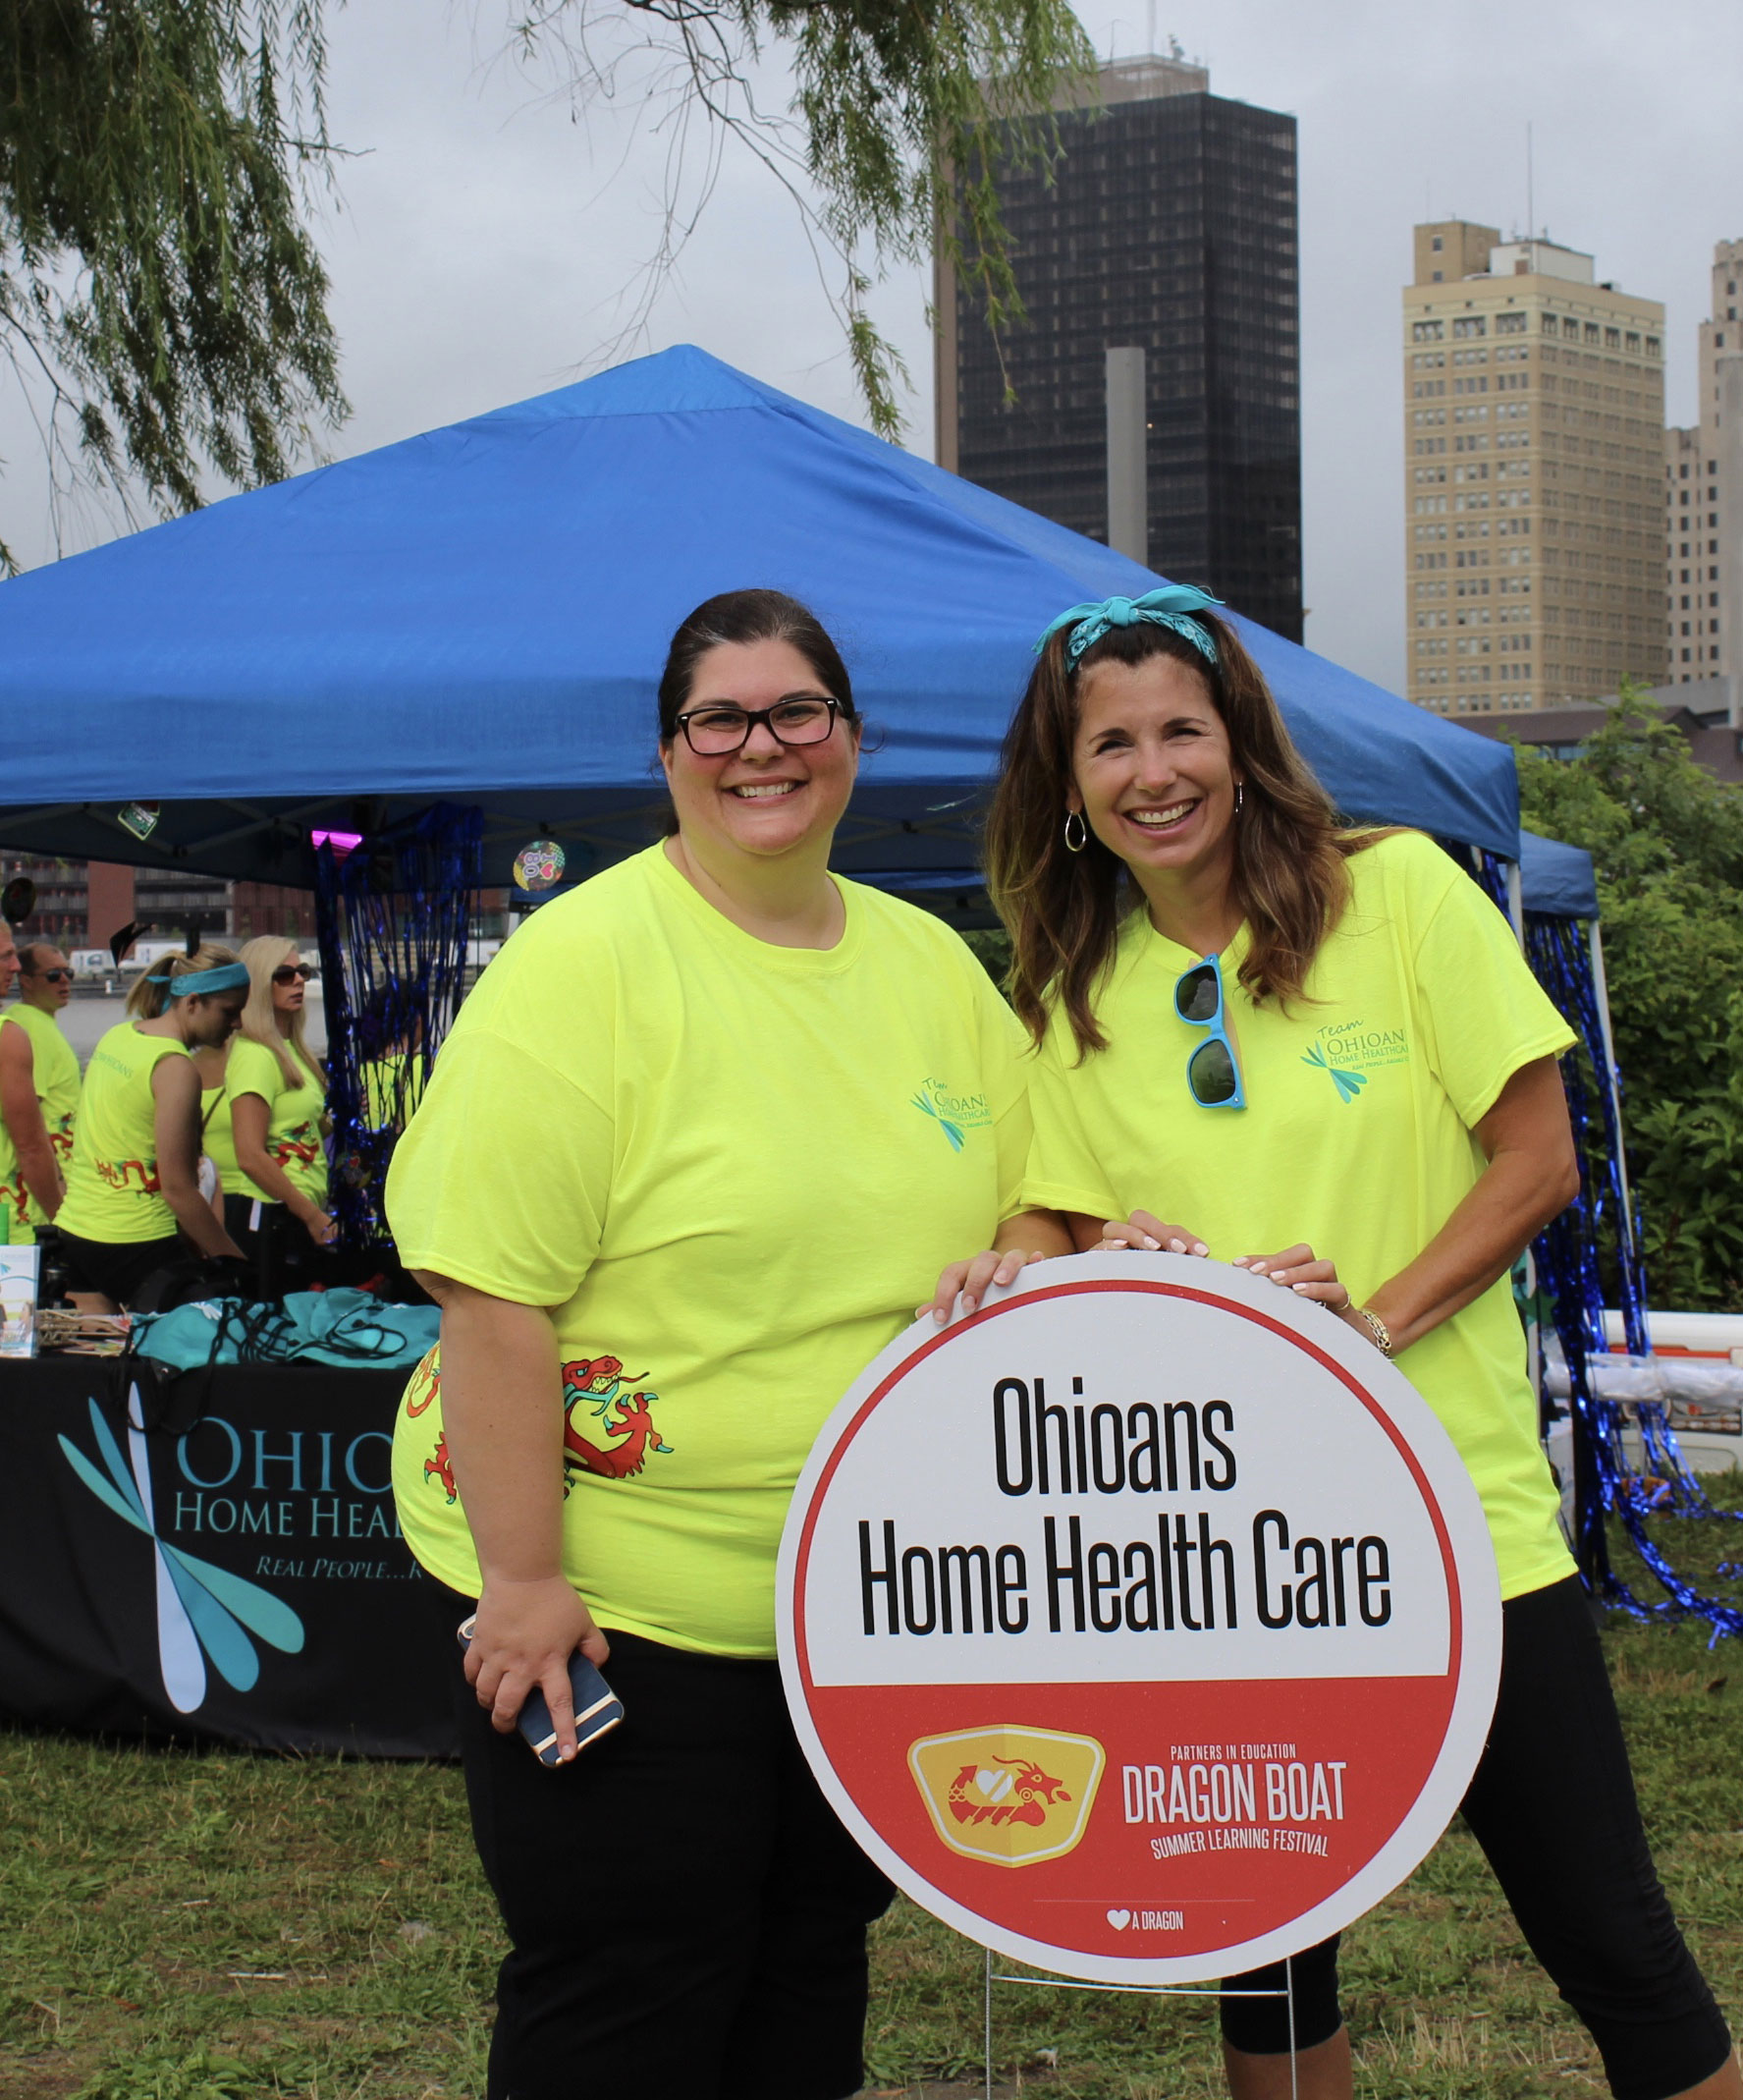 Ohioans Home Healthcare team members helping in the community.